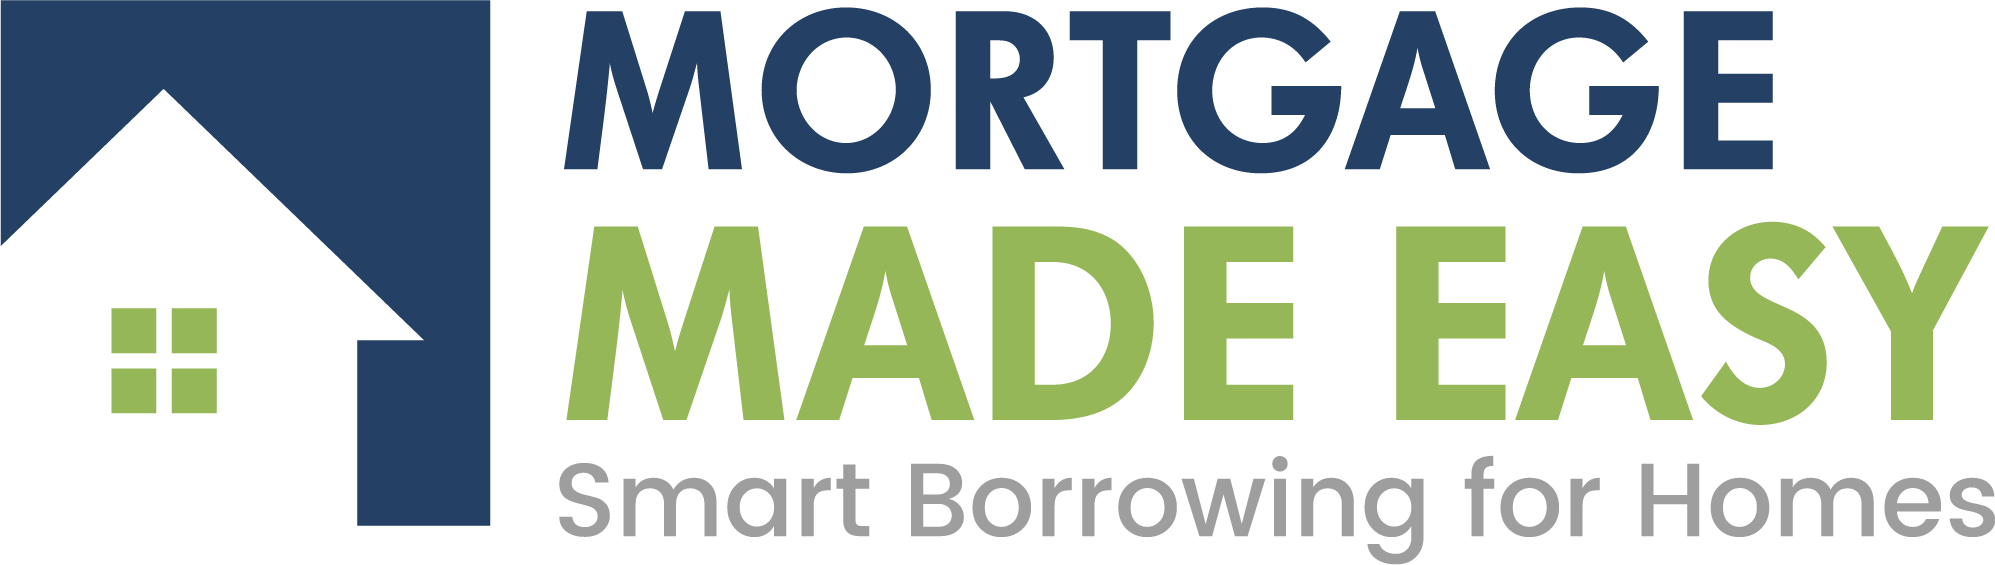 Mortgage Made Easy